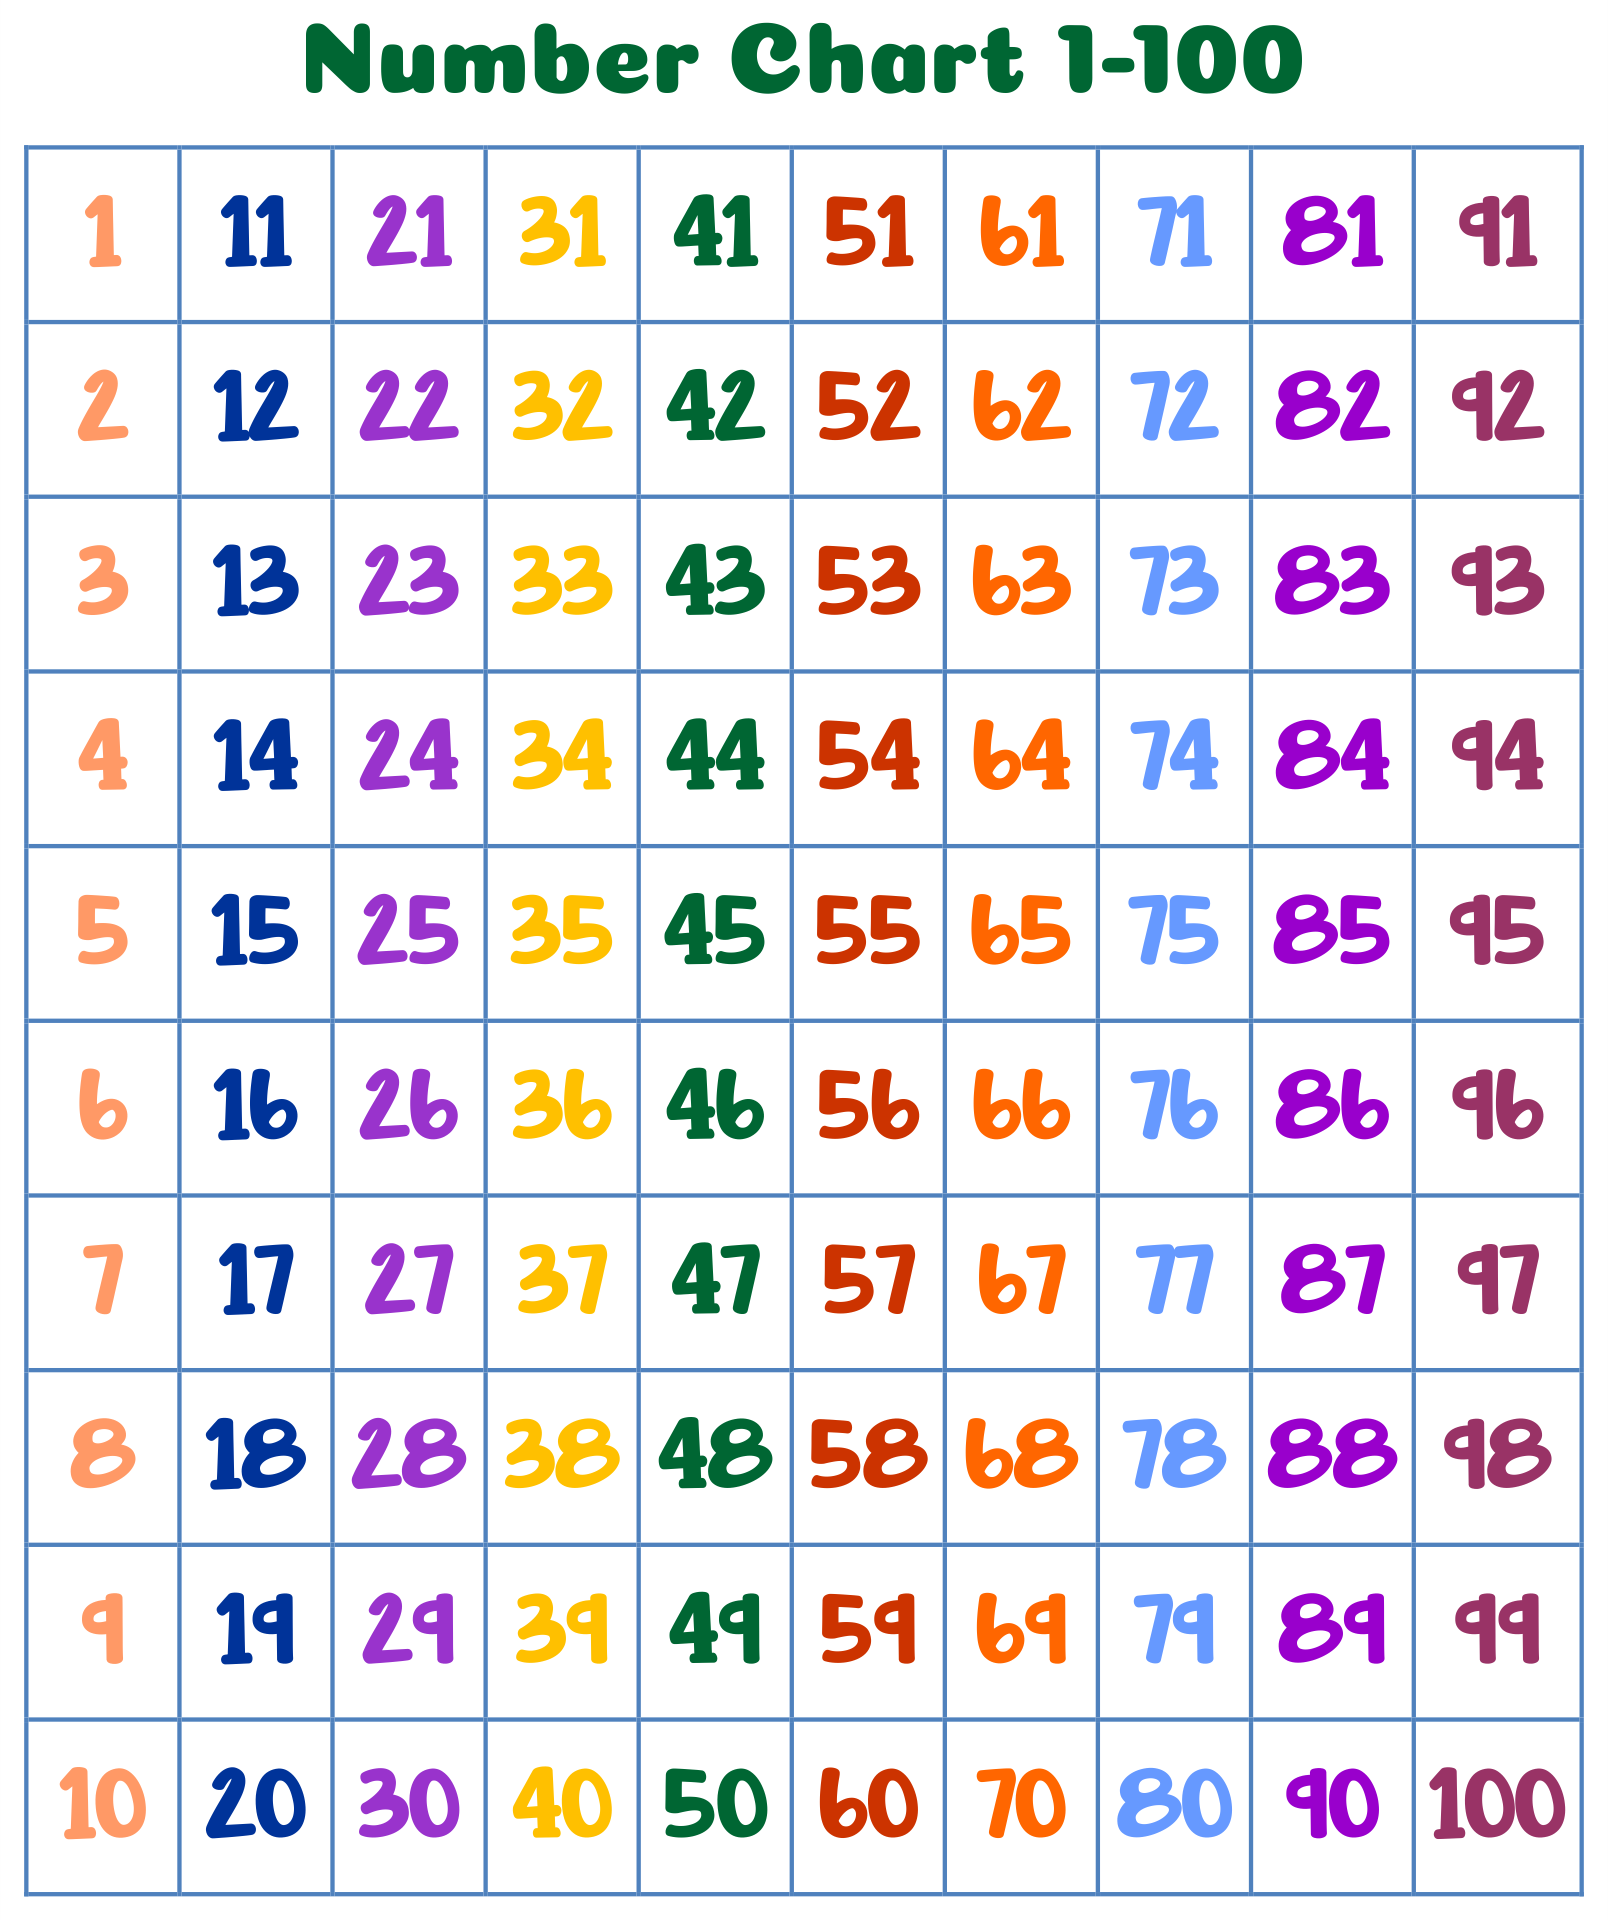 6-best-images-of-1-100-chart-printable-printable-number-chart-1-100